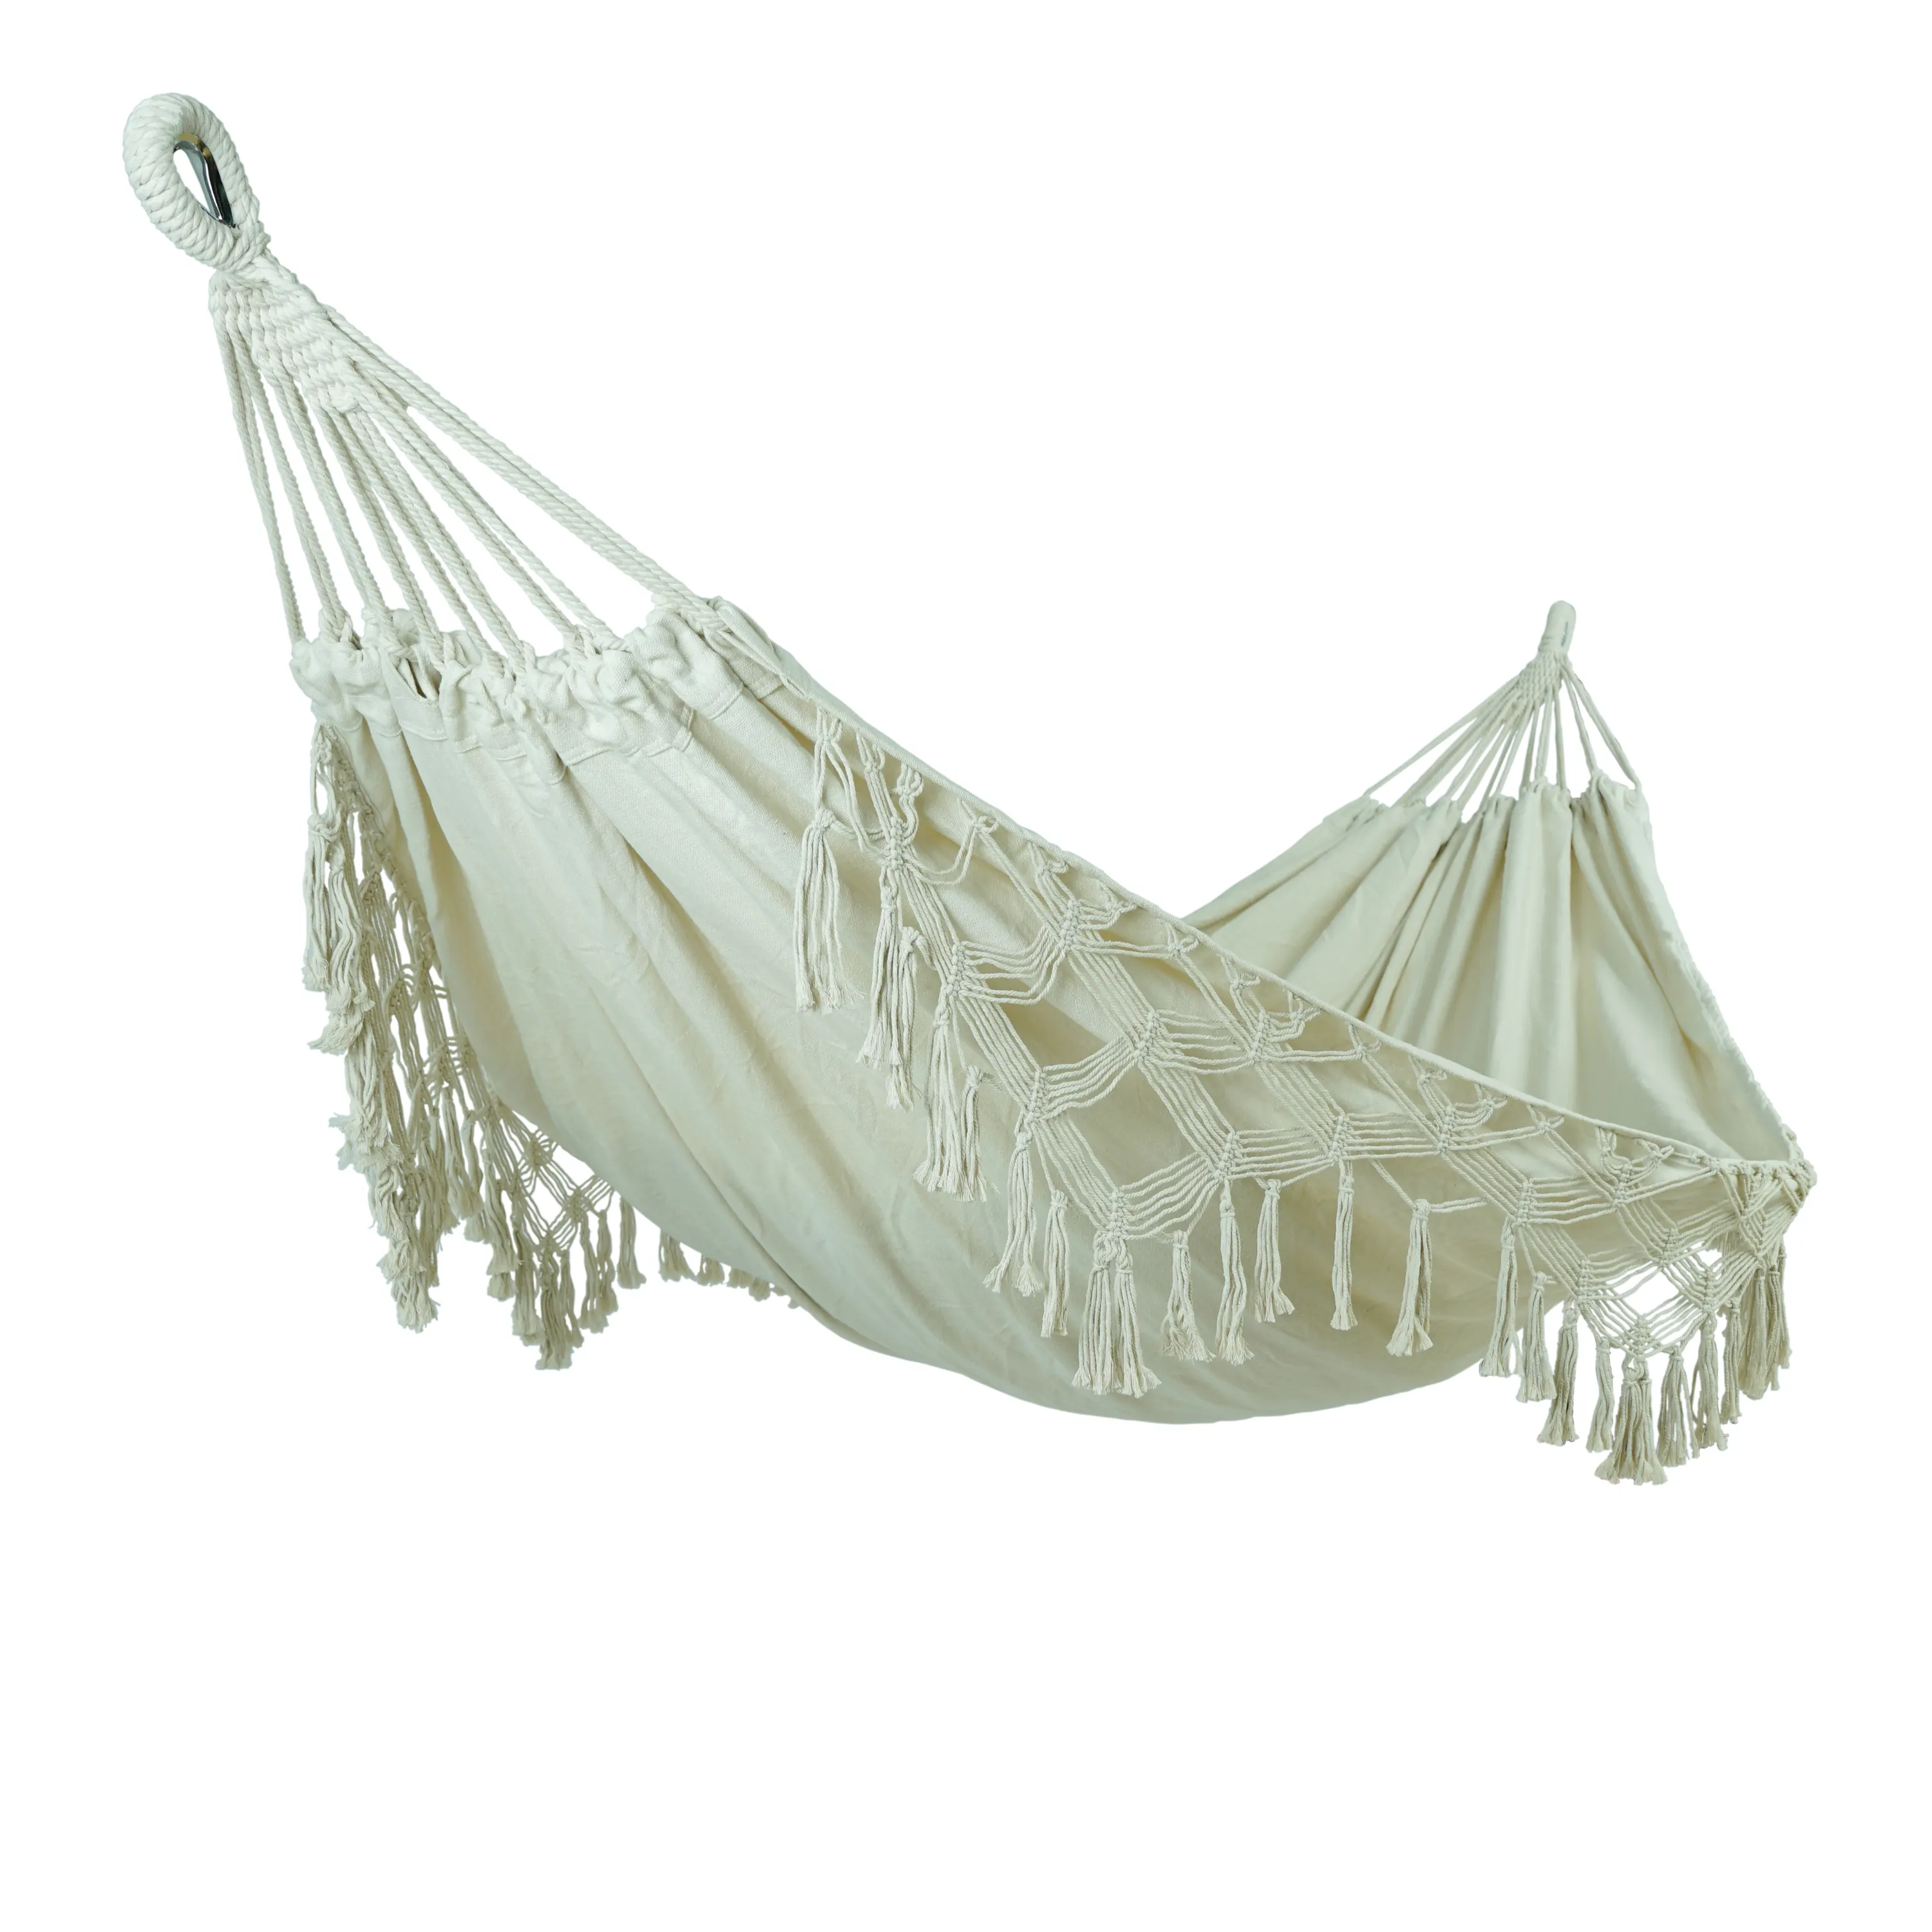 Outdoor Foldable Canvas Macrame Swing Hammock Indoor Large Double Cotton Hammock with Fringe Beach Yard Hanging Chair